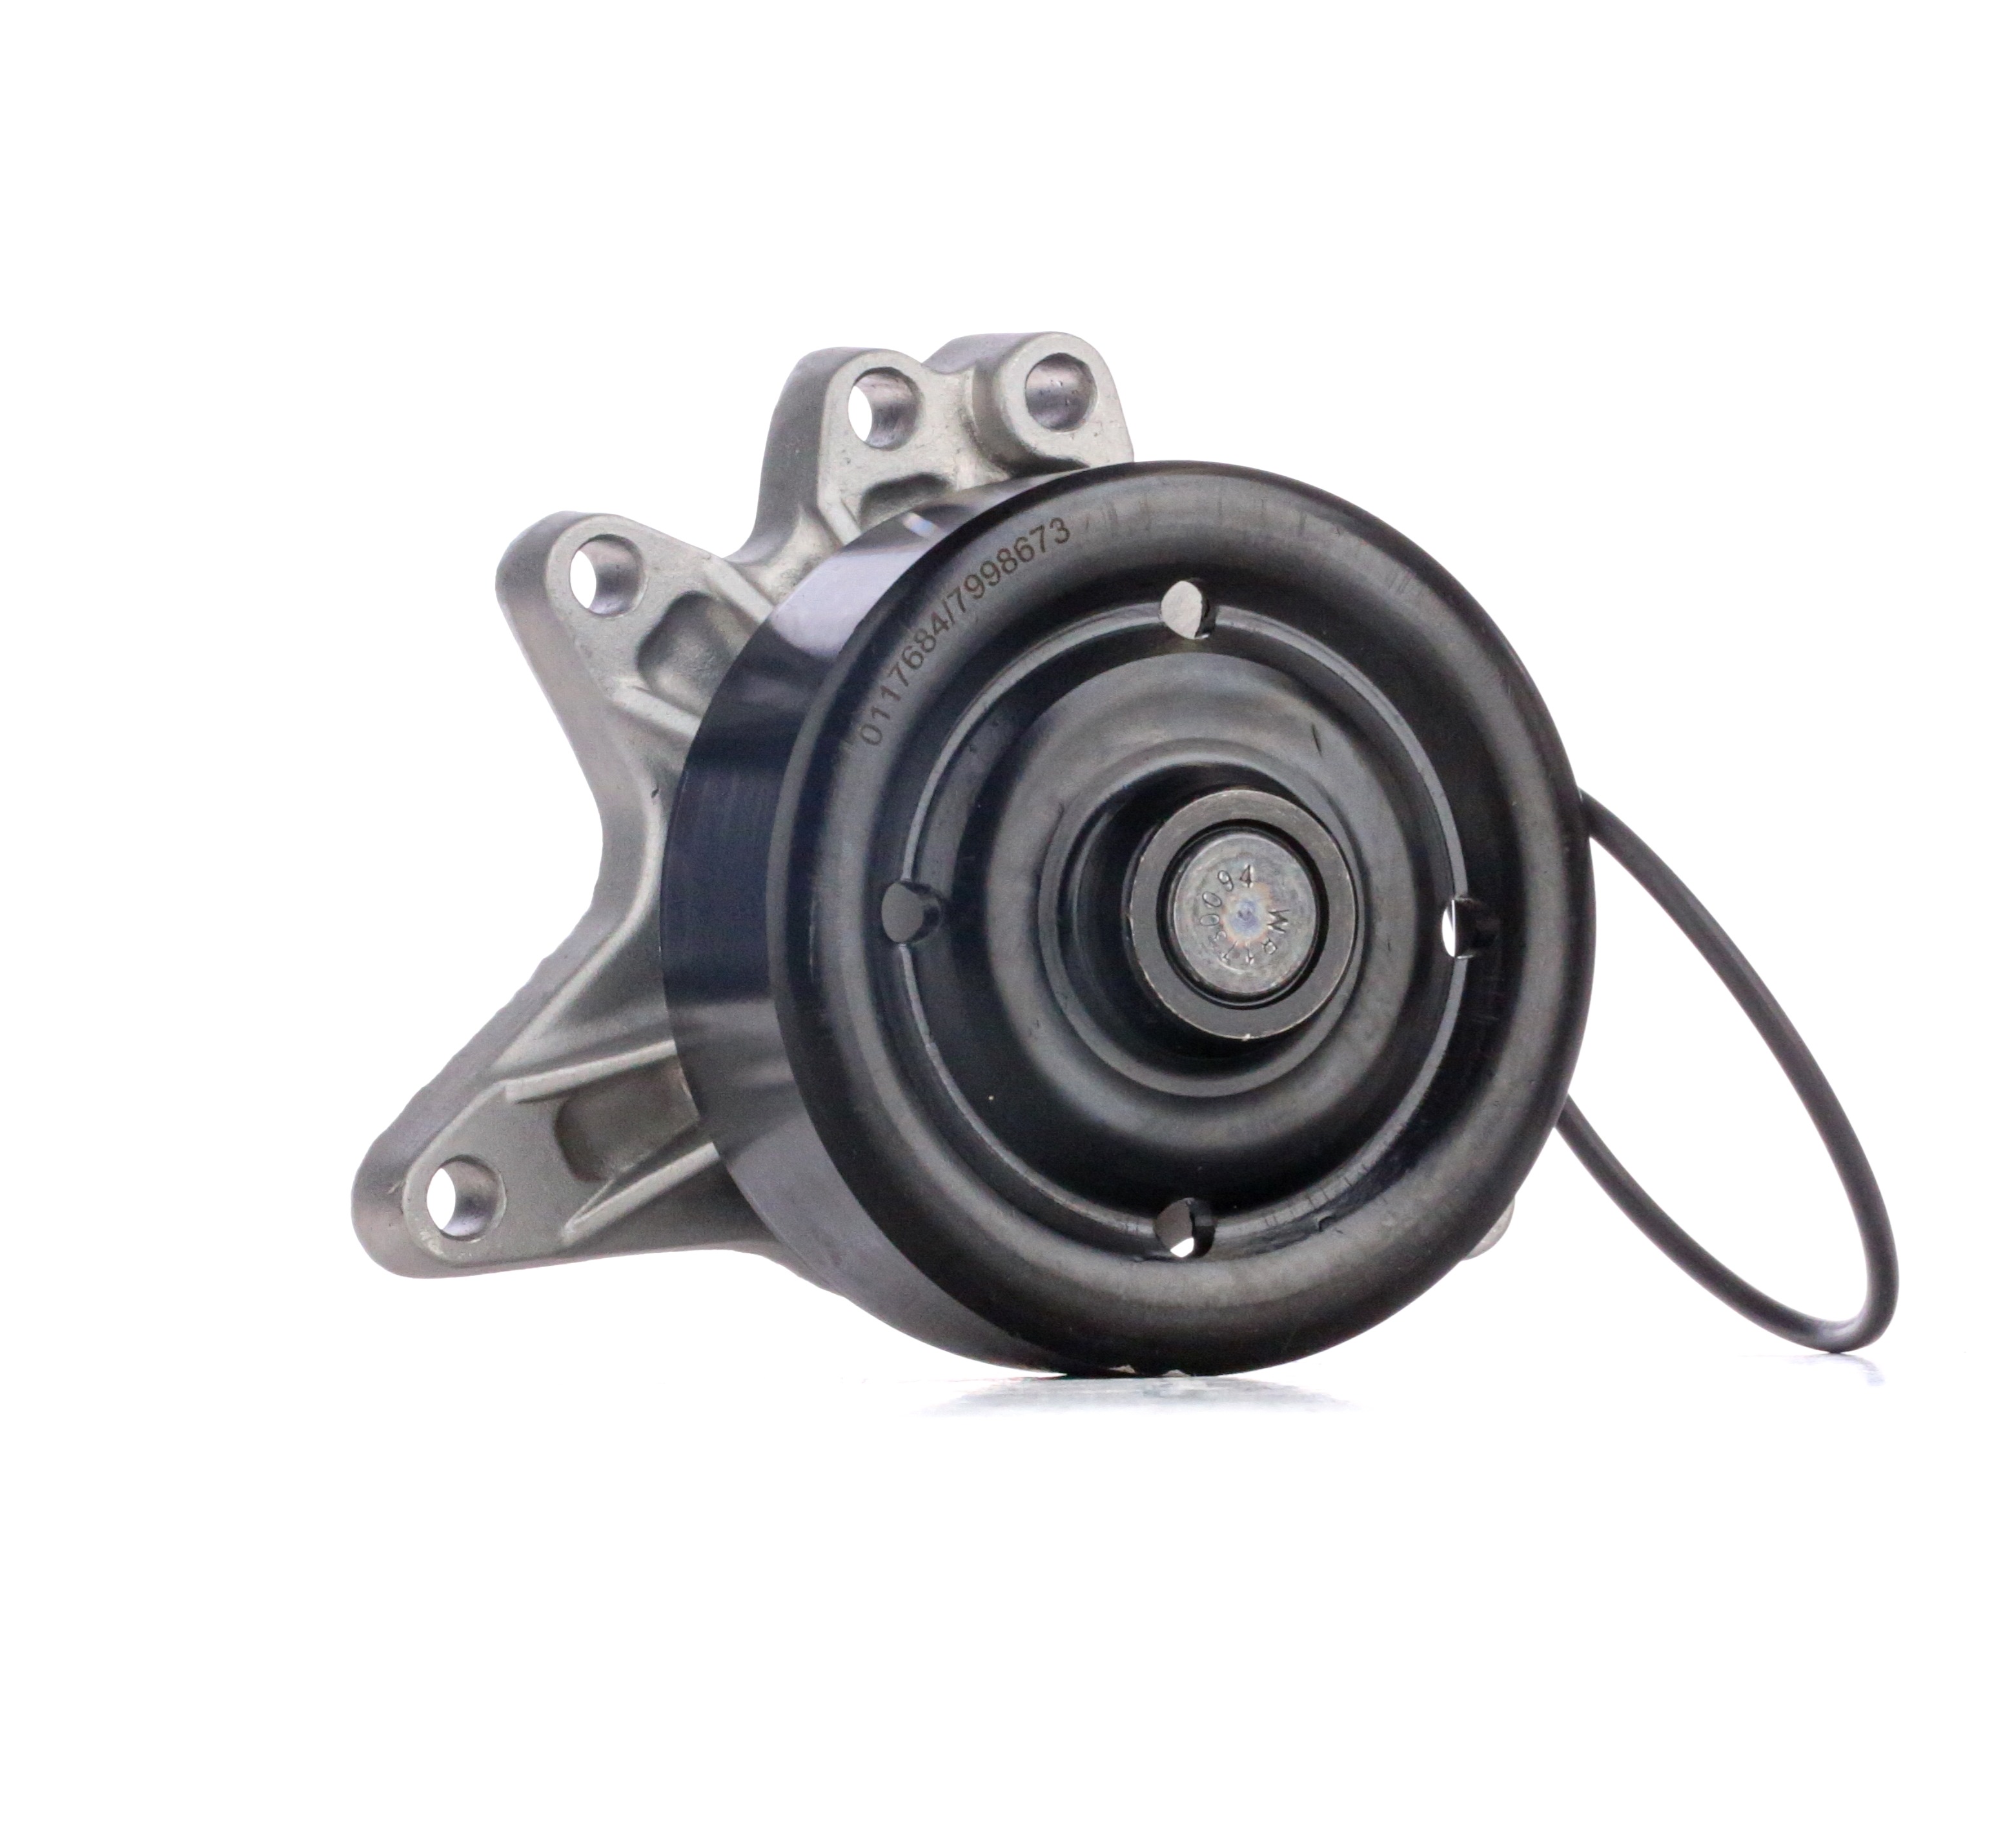 STARK SKWP-0520088 Water pump Cast Aluminium, with belt pulley, with bolts/screws, with seal ring, Belt Pulley pressed on, Mechanical, Metal, Belt Pulley Ø: 90 mm, for v-ribbed belt use